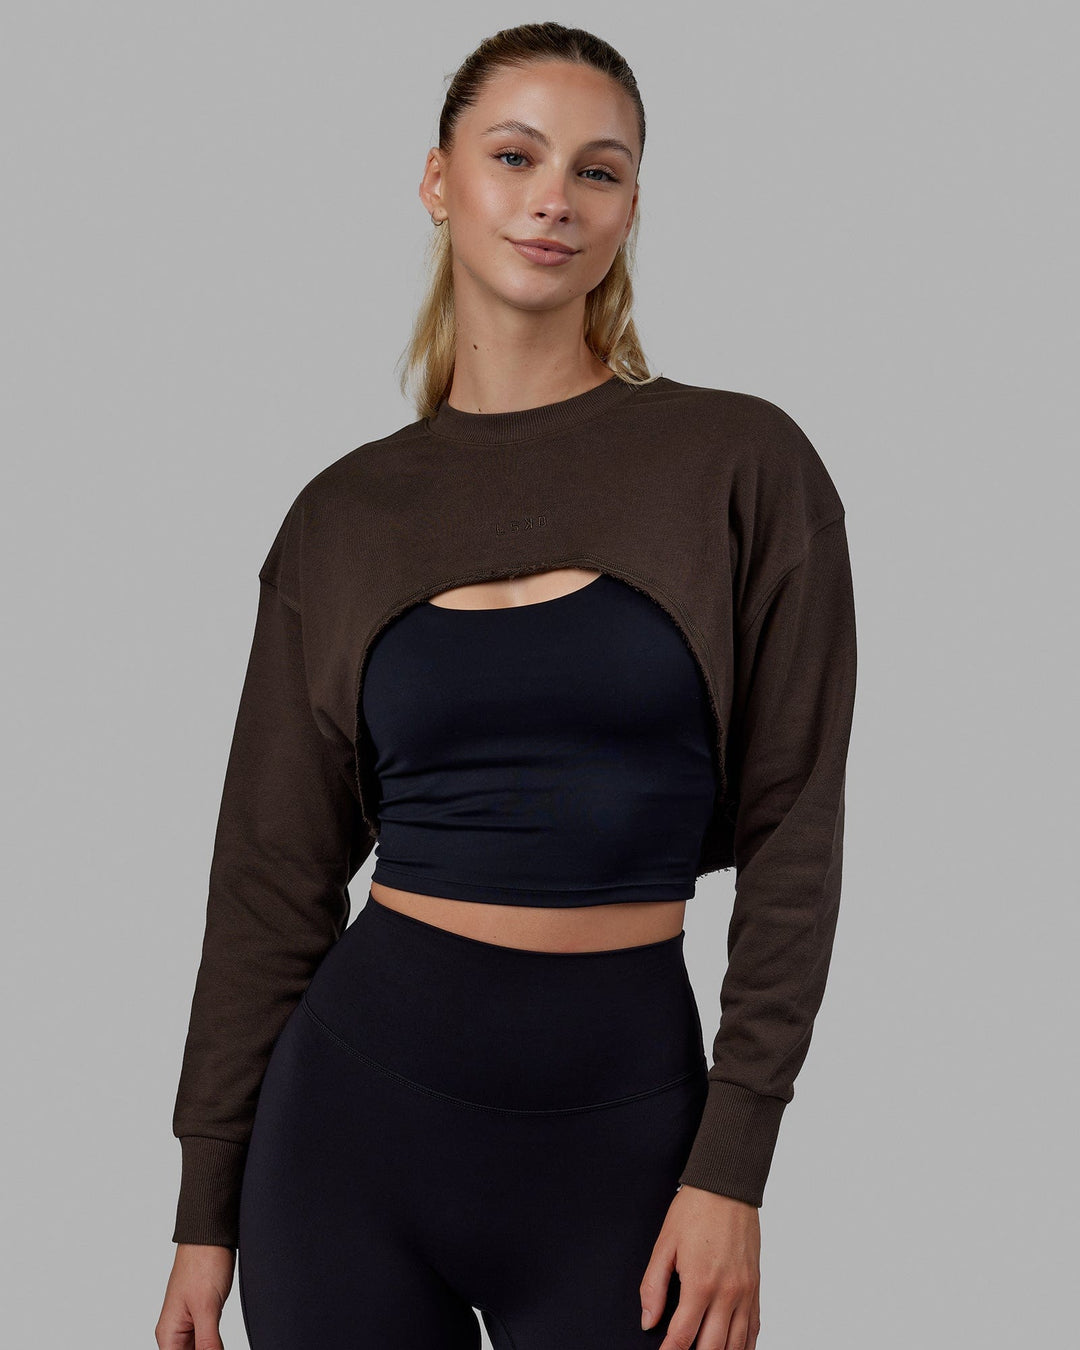 Force "Super Cropped" Sweater - Chocolate